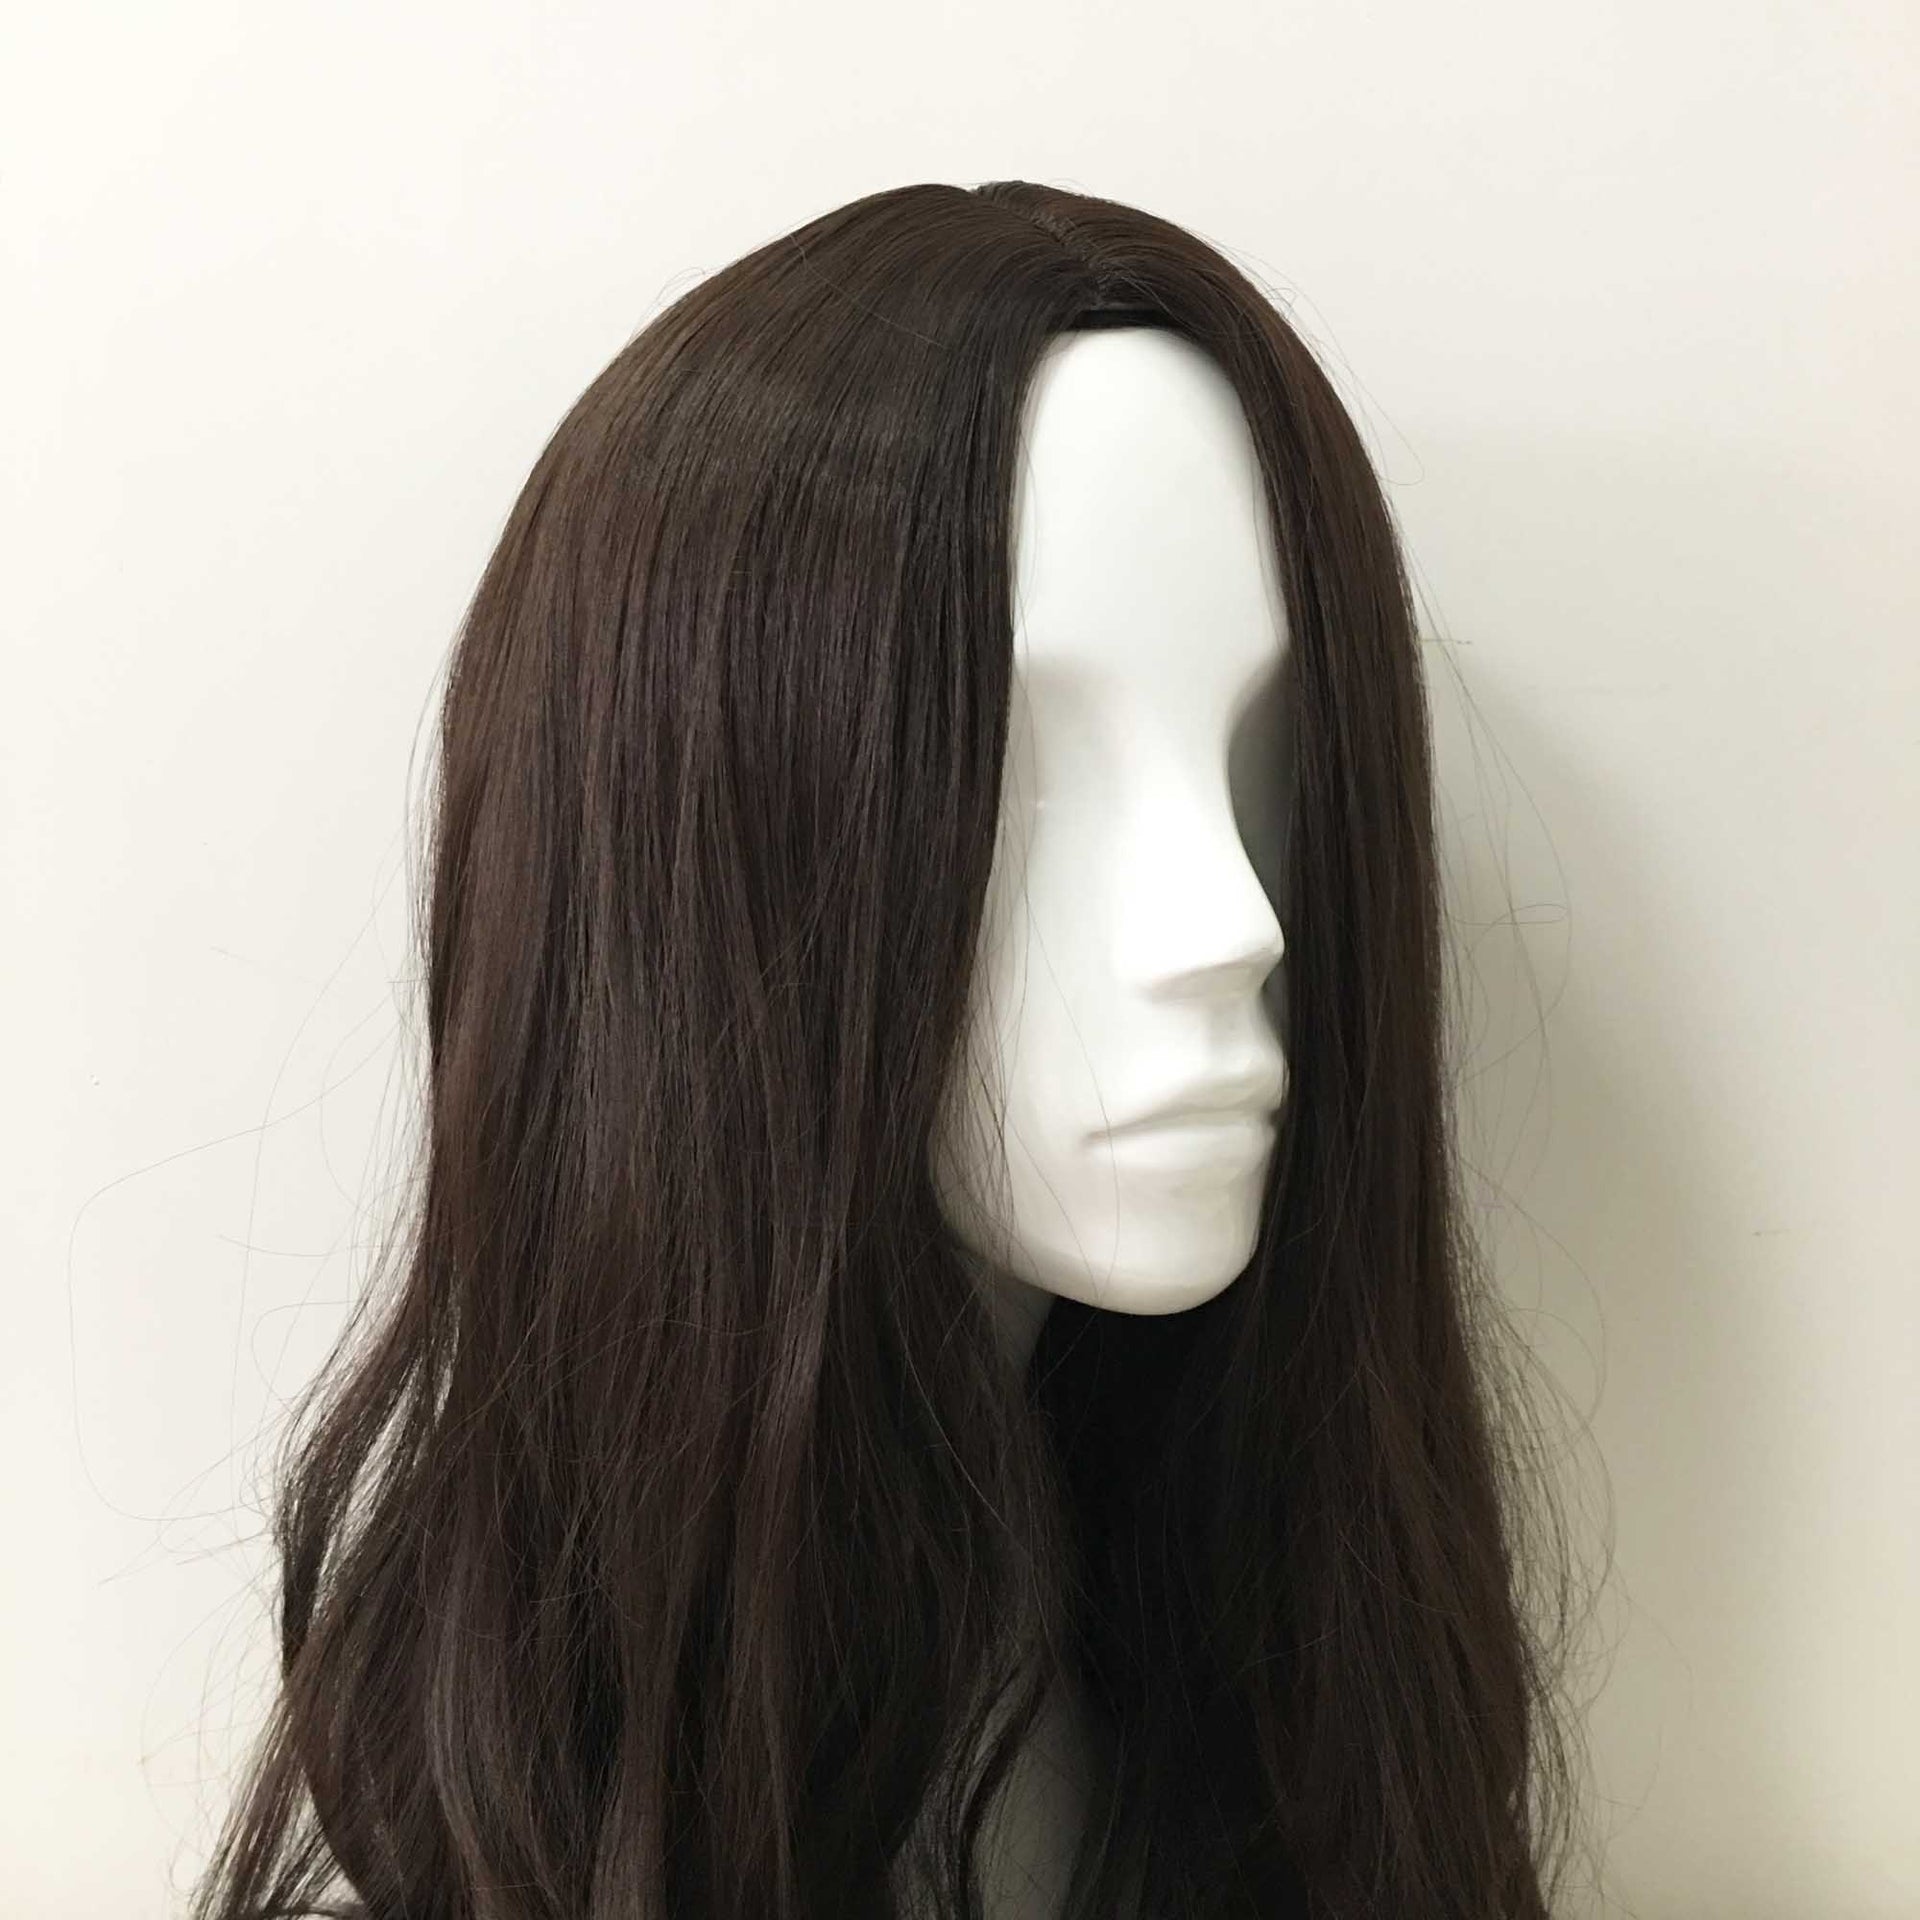 nevermindyrhead Women Dark Brown Long Curly Middle Part Long Cosplay Wig